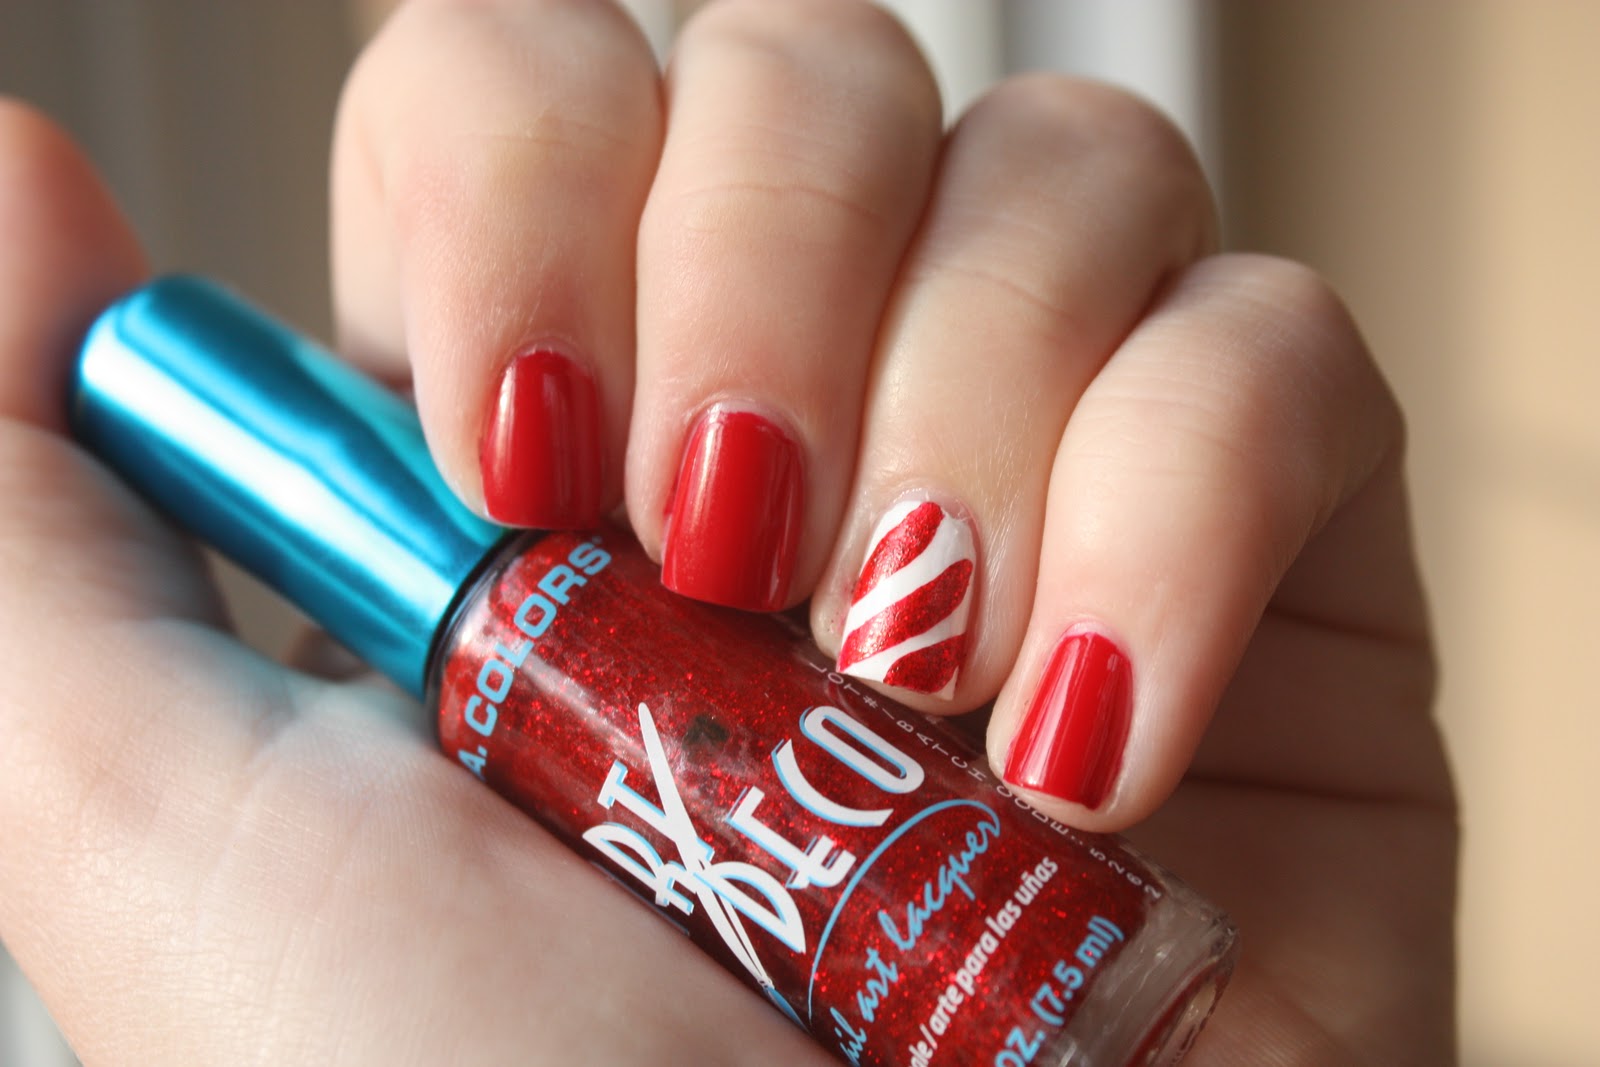 1. Candy Cane Nails - wide 1